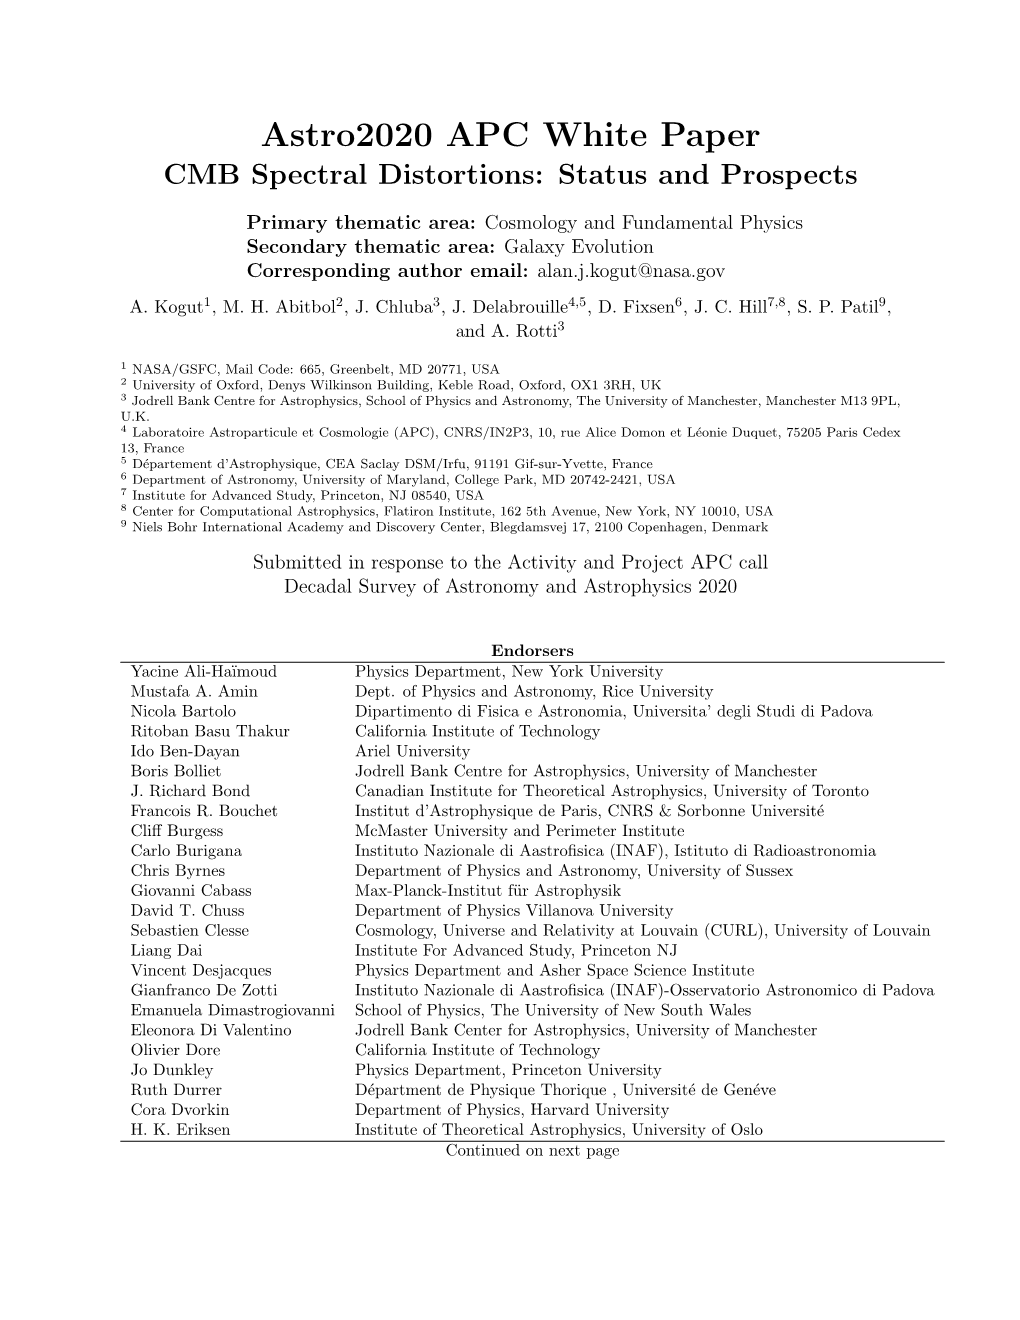 CMB Spectral Distortions: Status and Prospects